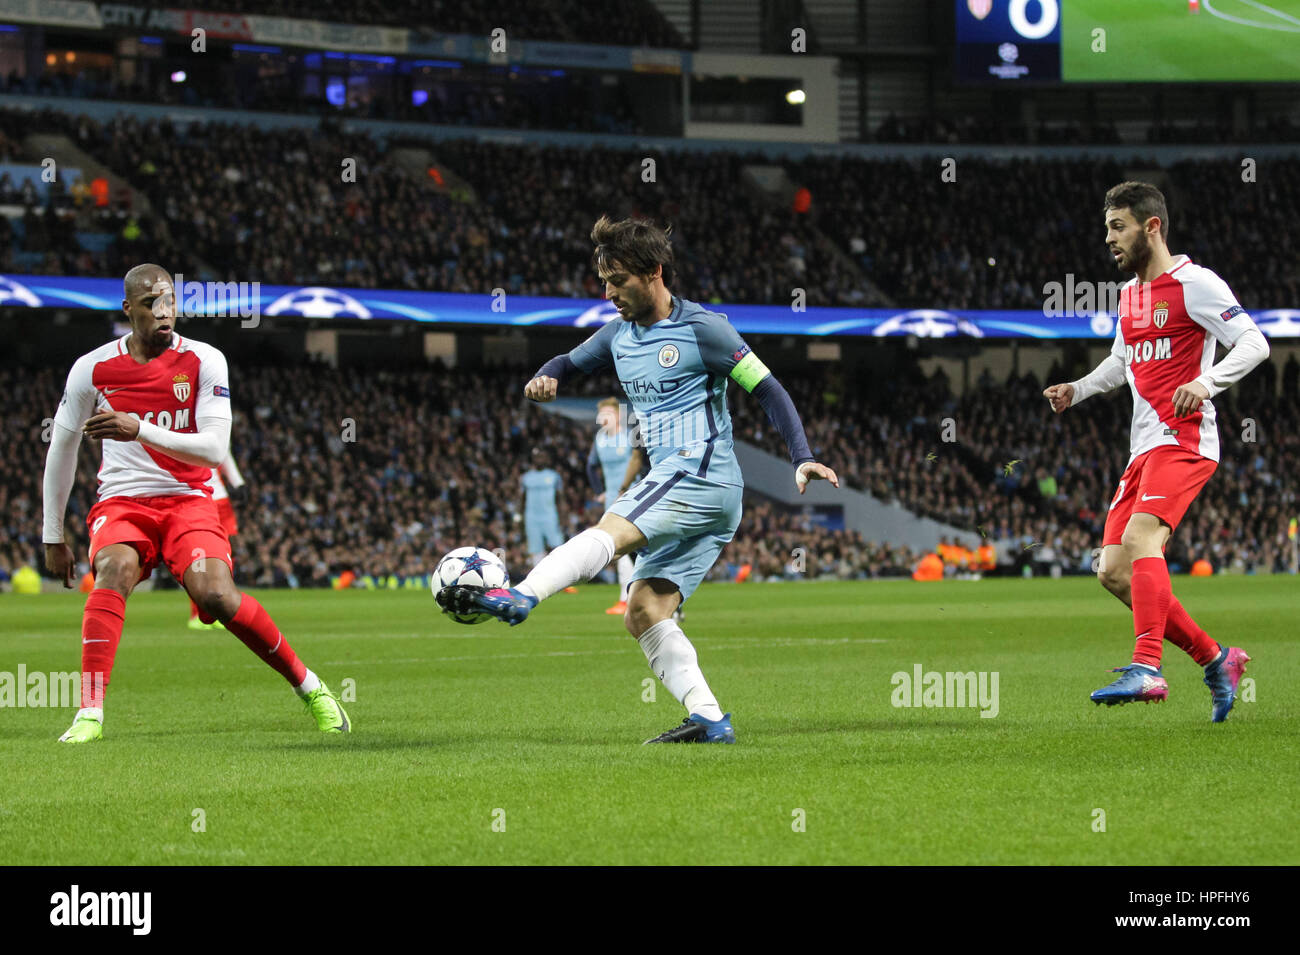 Manchester, UK. 21st Feb, 2017. David Silva of Manchester City during the UEFA Champions League Round of 16 first leg match between Manchester City and AS Monaco at the Etihad Stadium on February 21st 2017 in Manchester, England. Credit: PHC Images/Alamy Live News Stock Photo